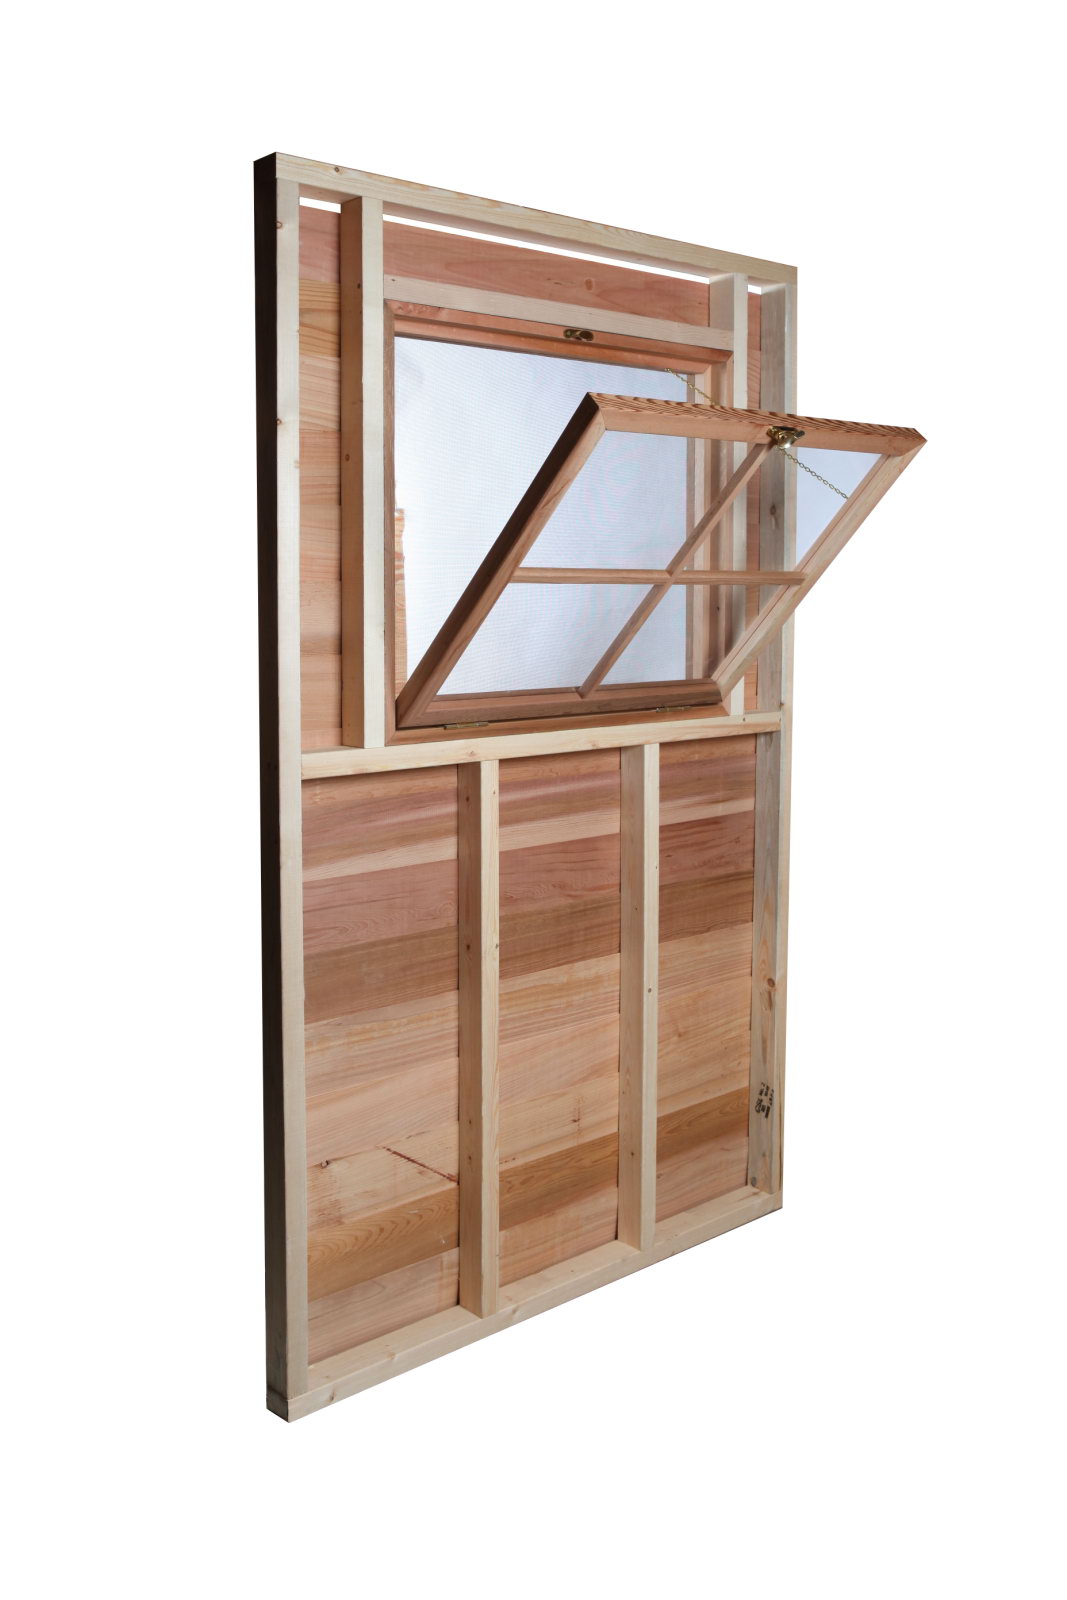 Shed Option - Functional Window With Screen